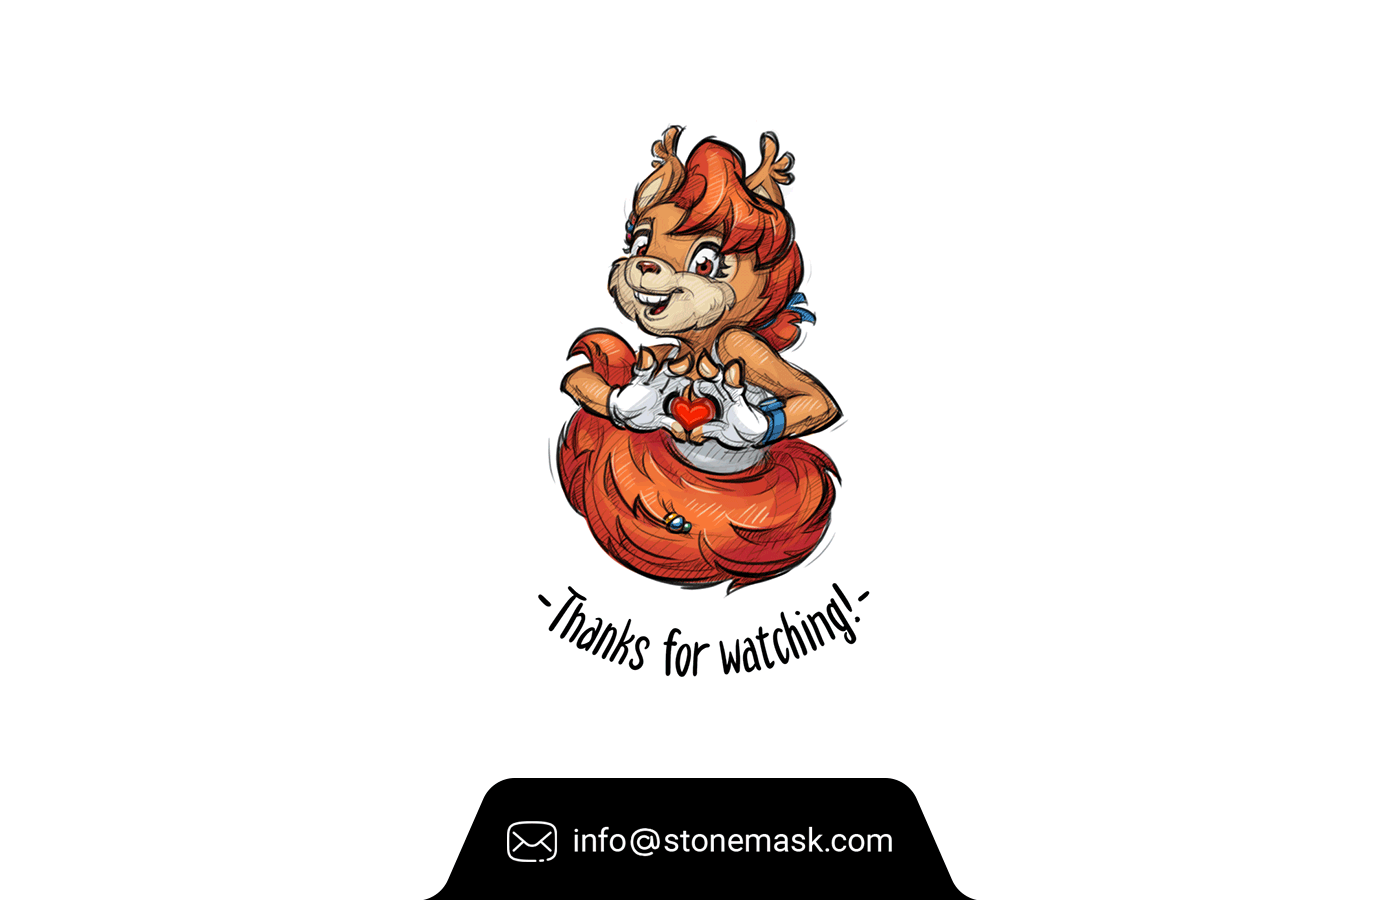 Mascot Character Character design  vector adobe illustrator Packaging brand identity squirrel chocolate packaging design